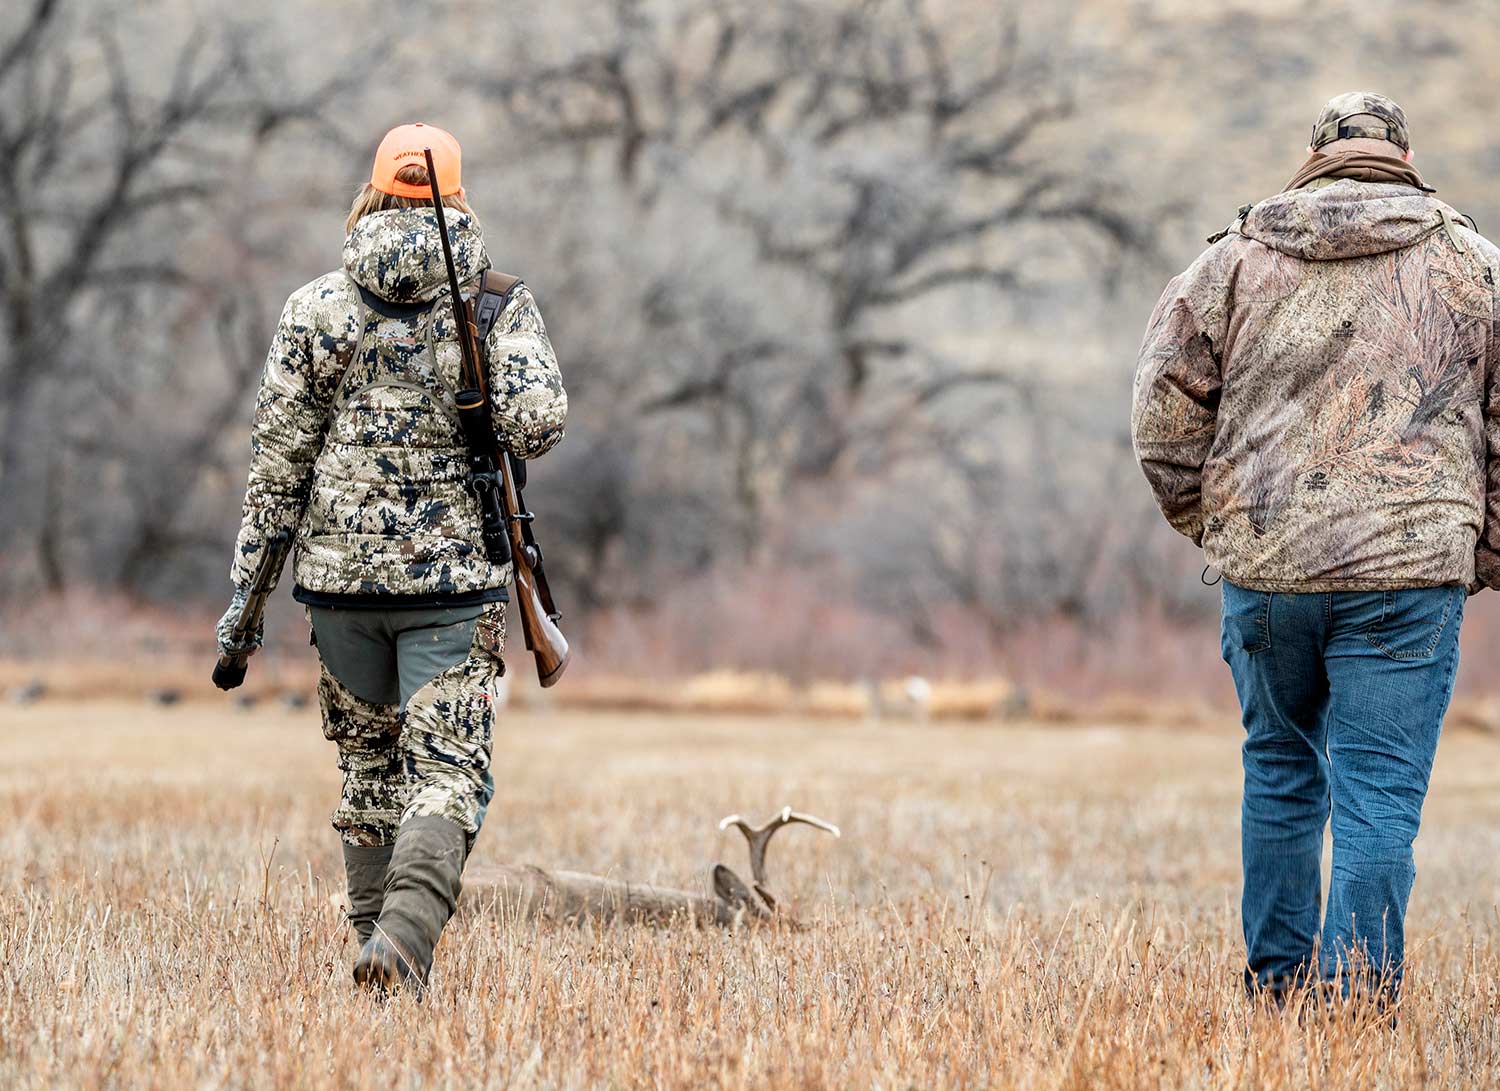 Two hunters decked out in gear walk through a field.